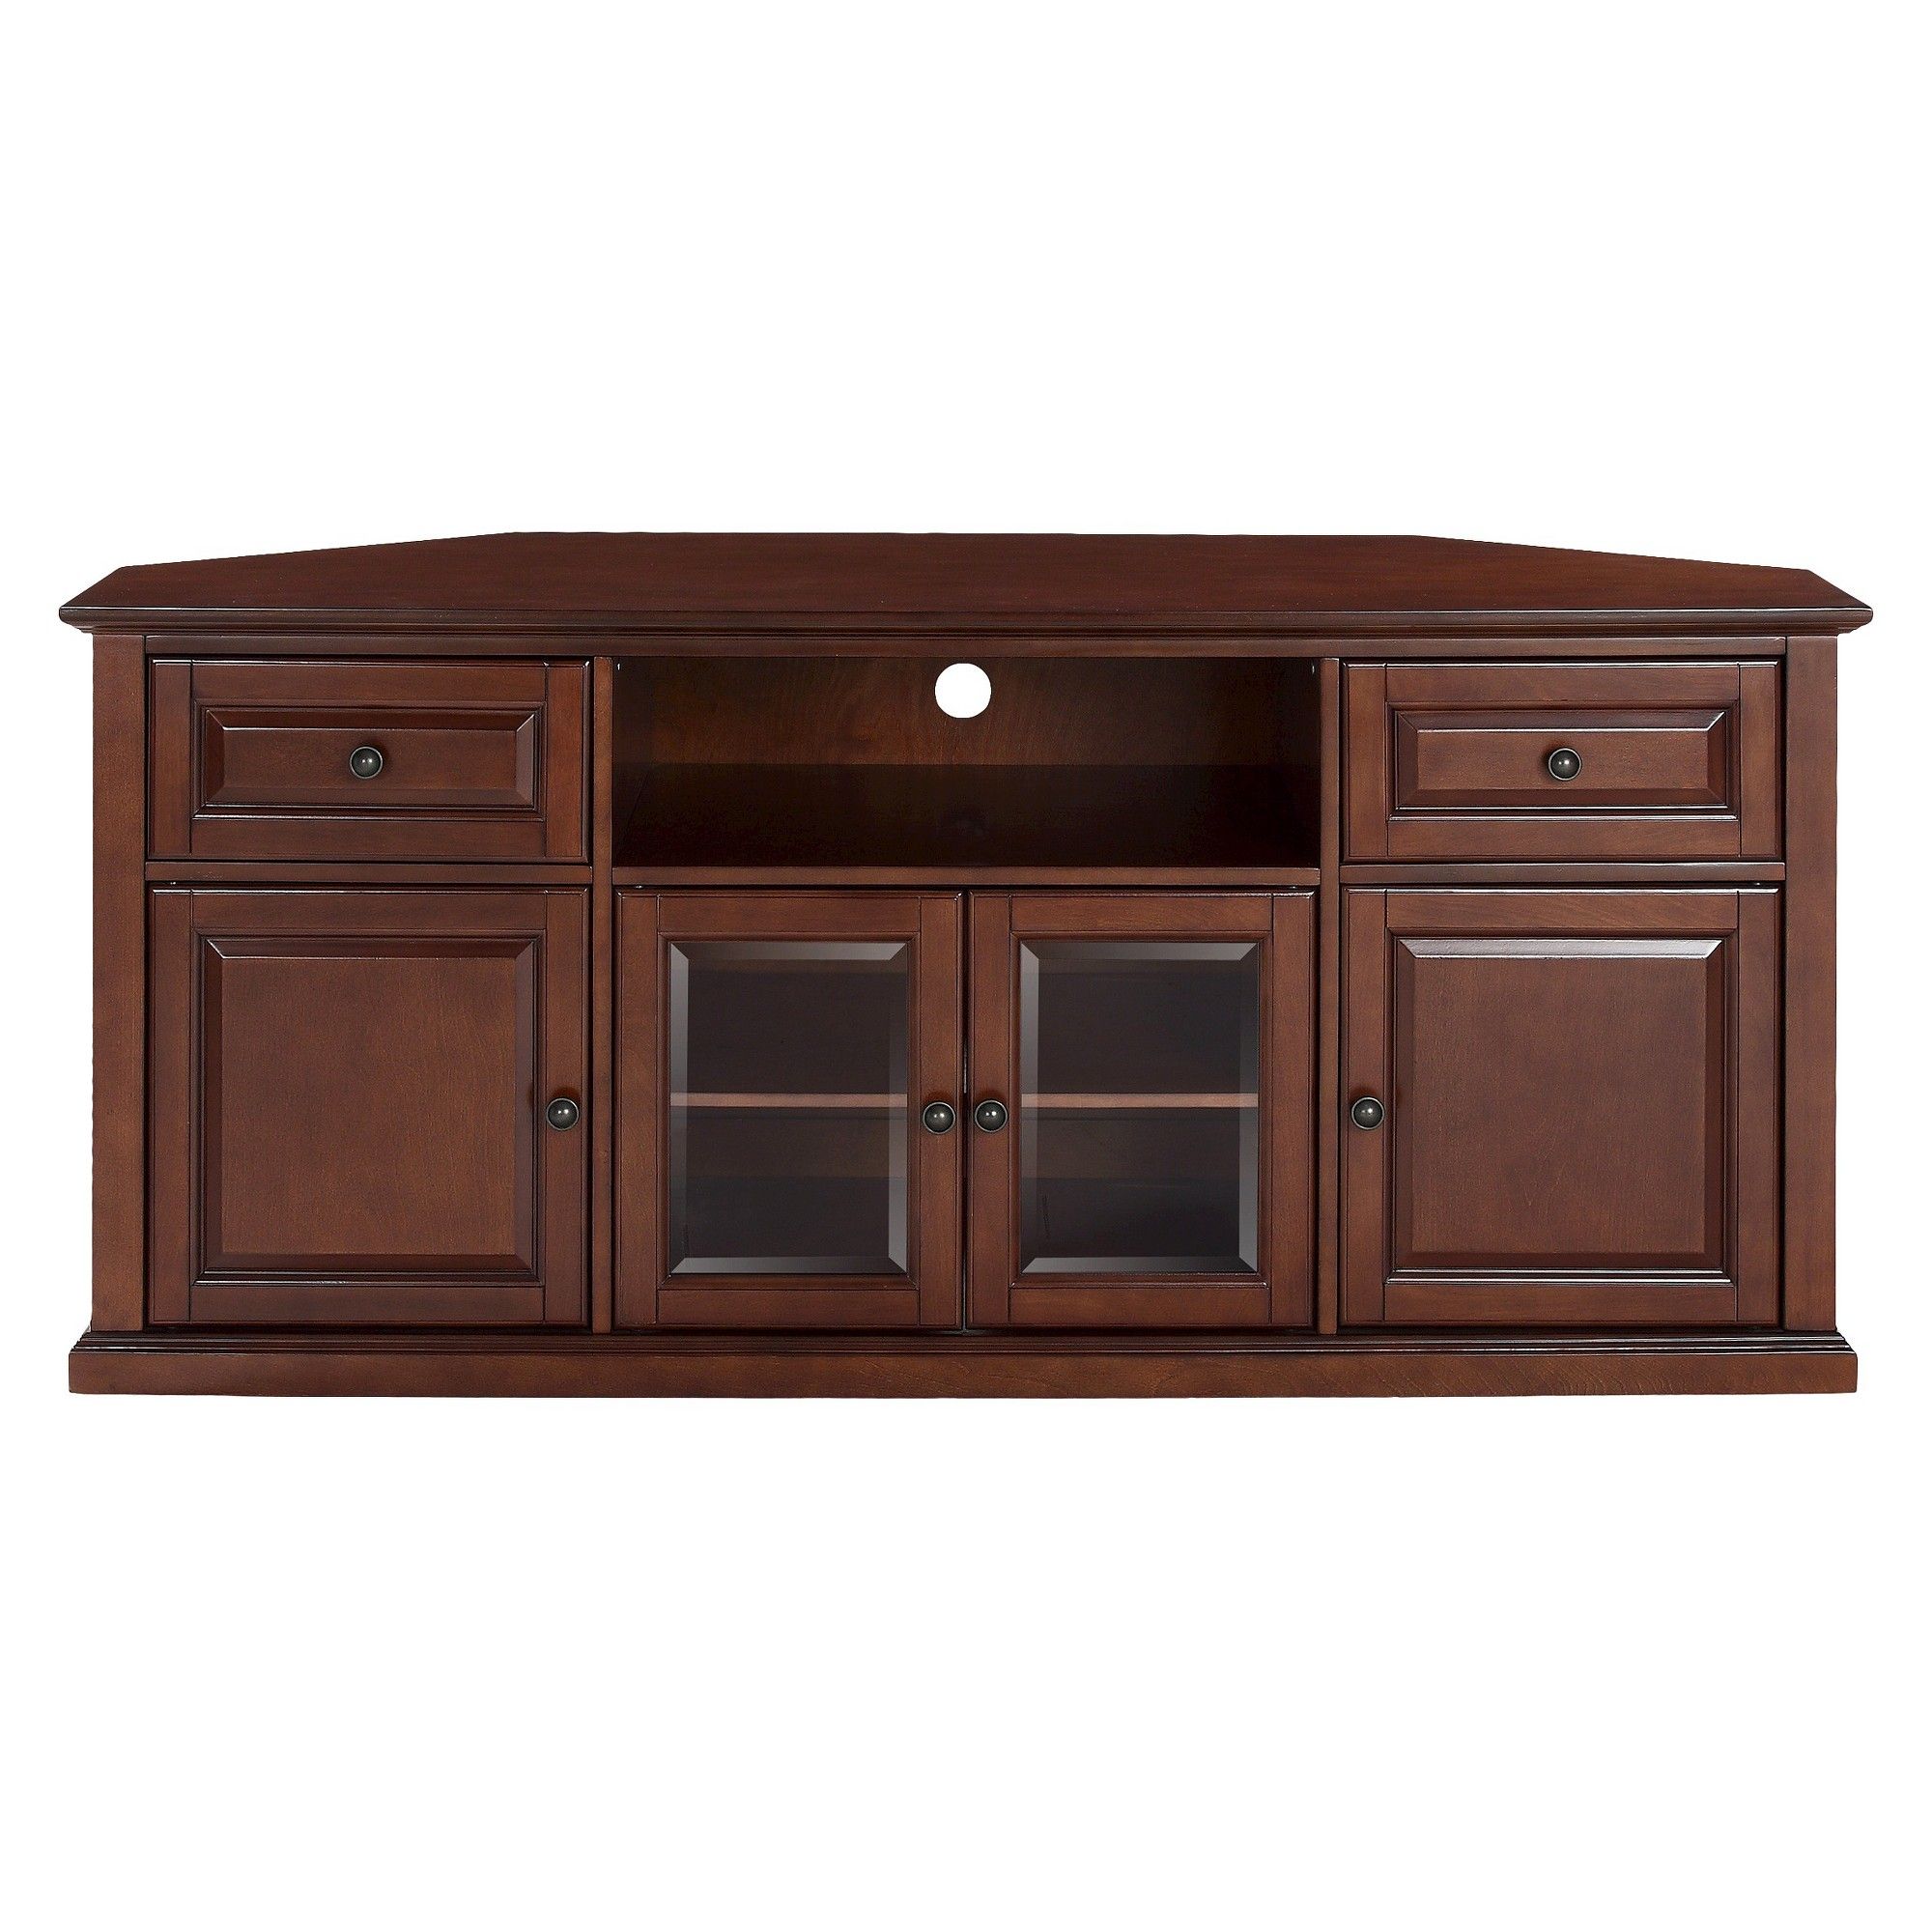 Shelby Corner Tv Stand For Tvs Up To 60" Mahogany With Regard To Mahogany Corner Tv Stands (View 7 of 15)